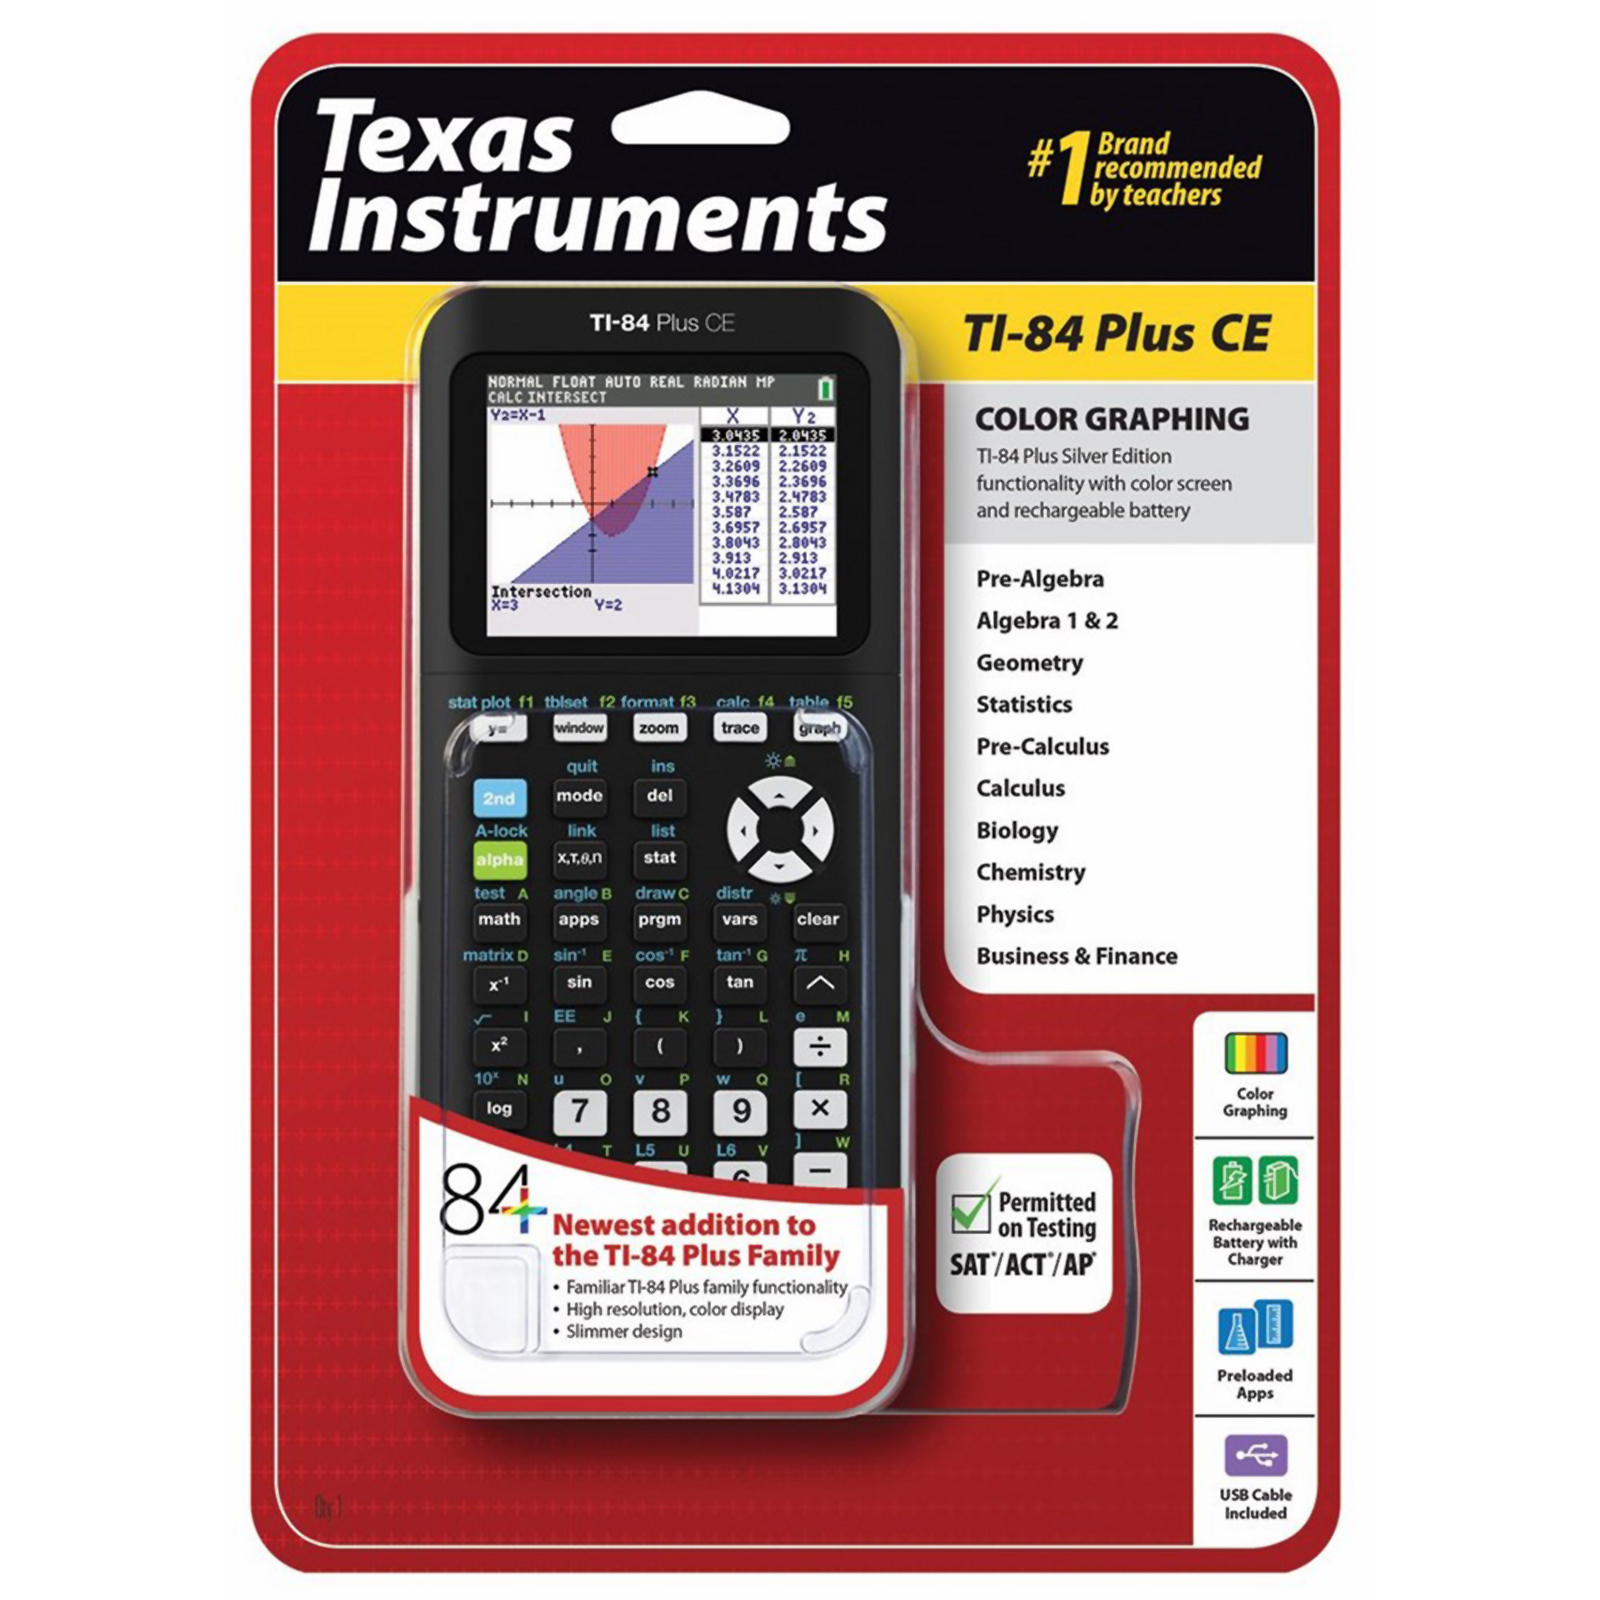 Texas Instruments TI-84 Plus Graphing Calculator - Sears Marketplace